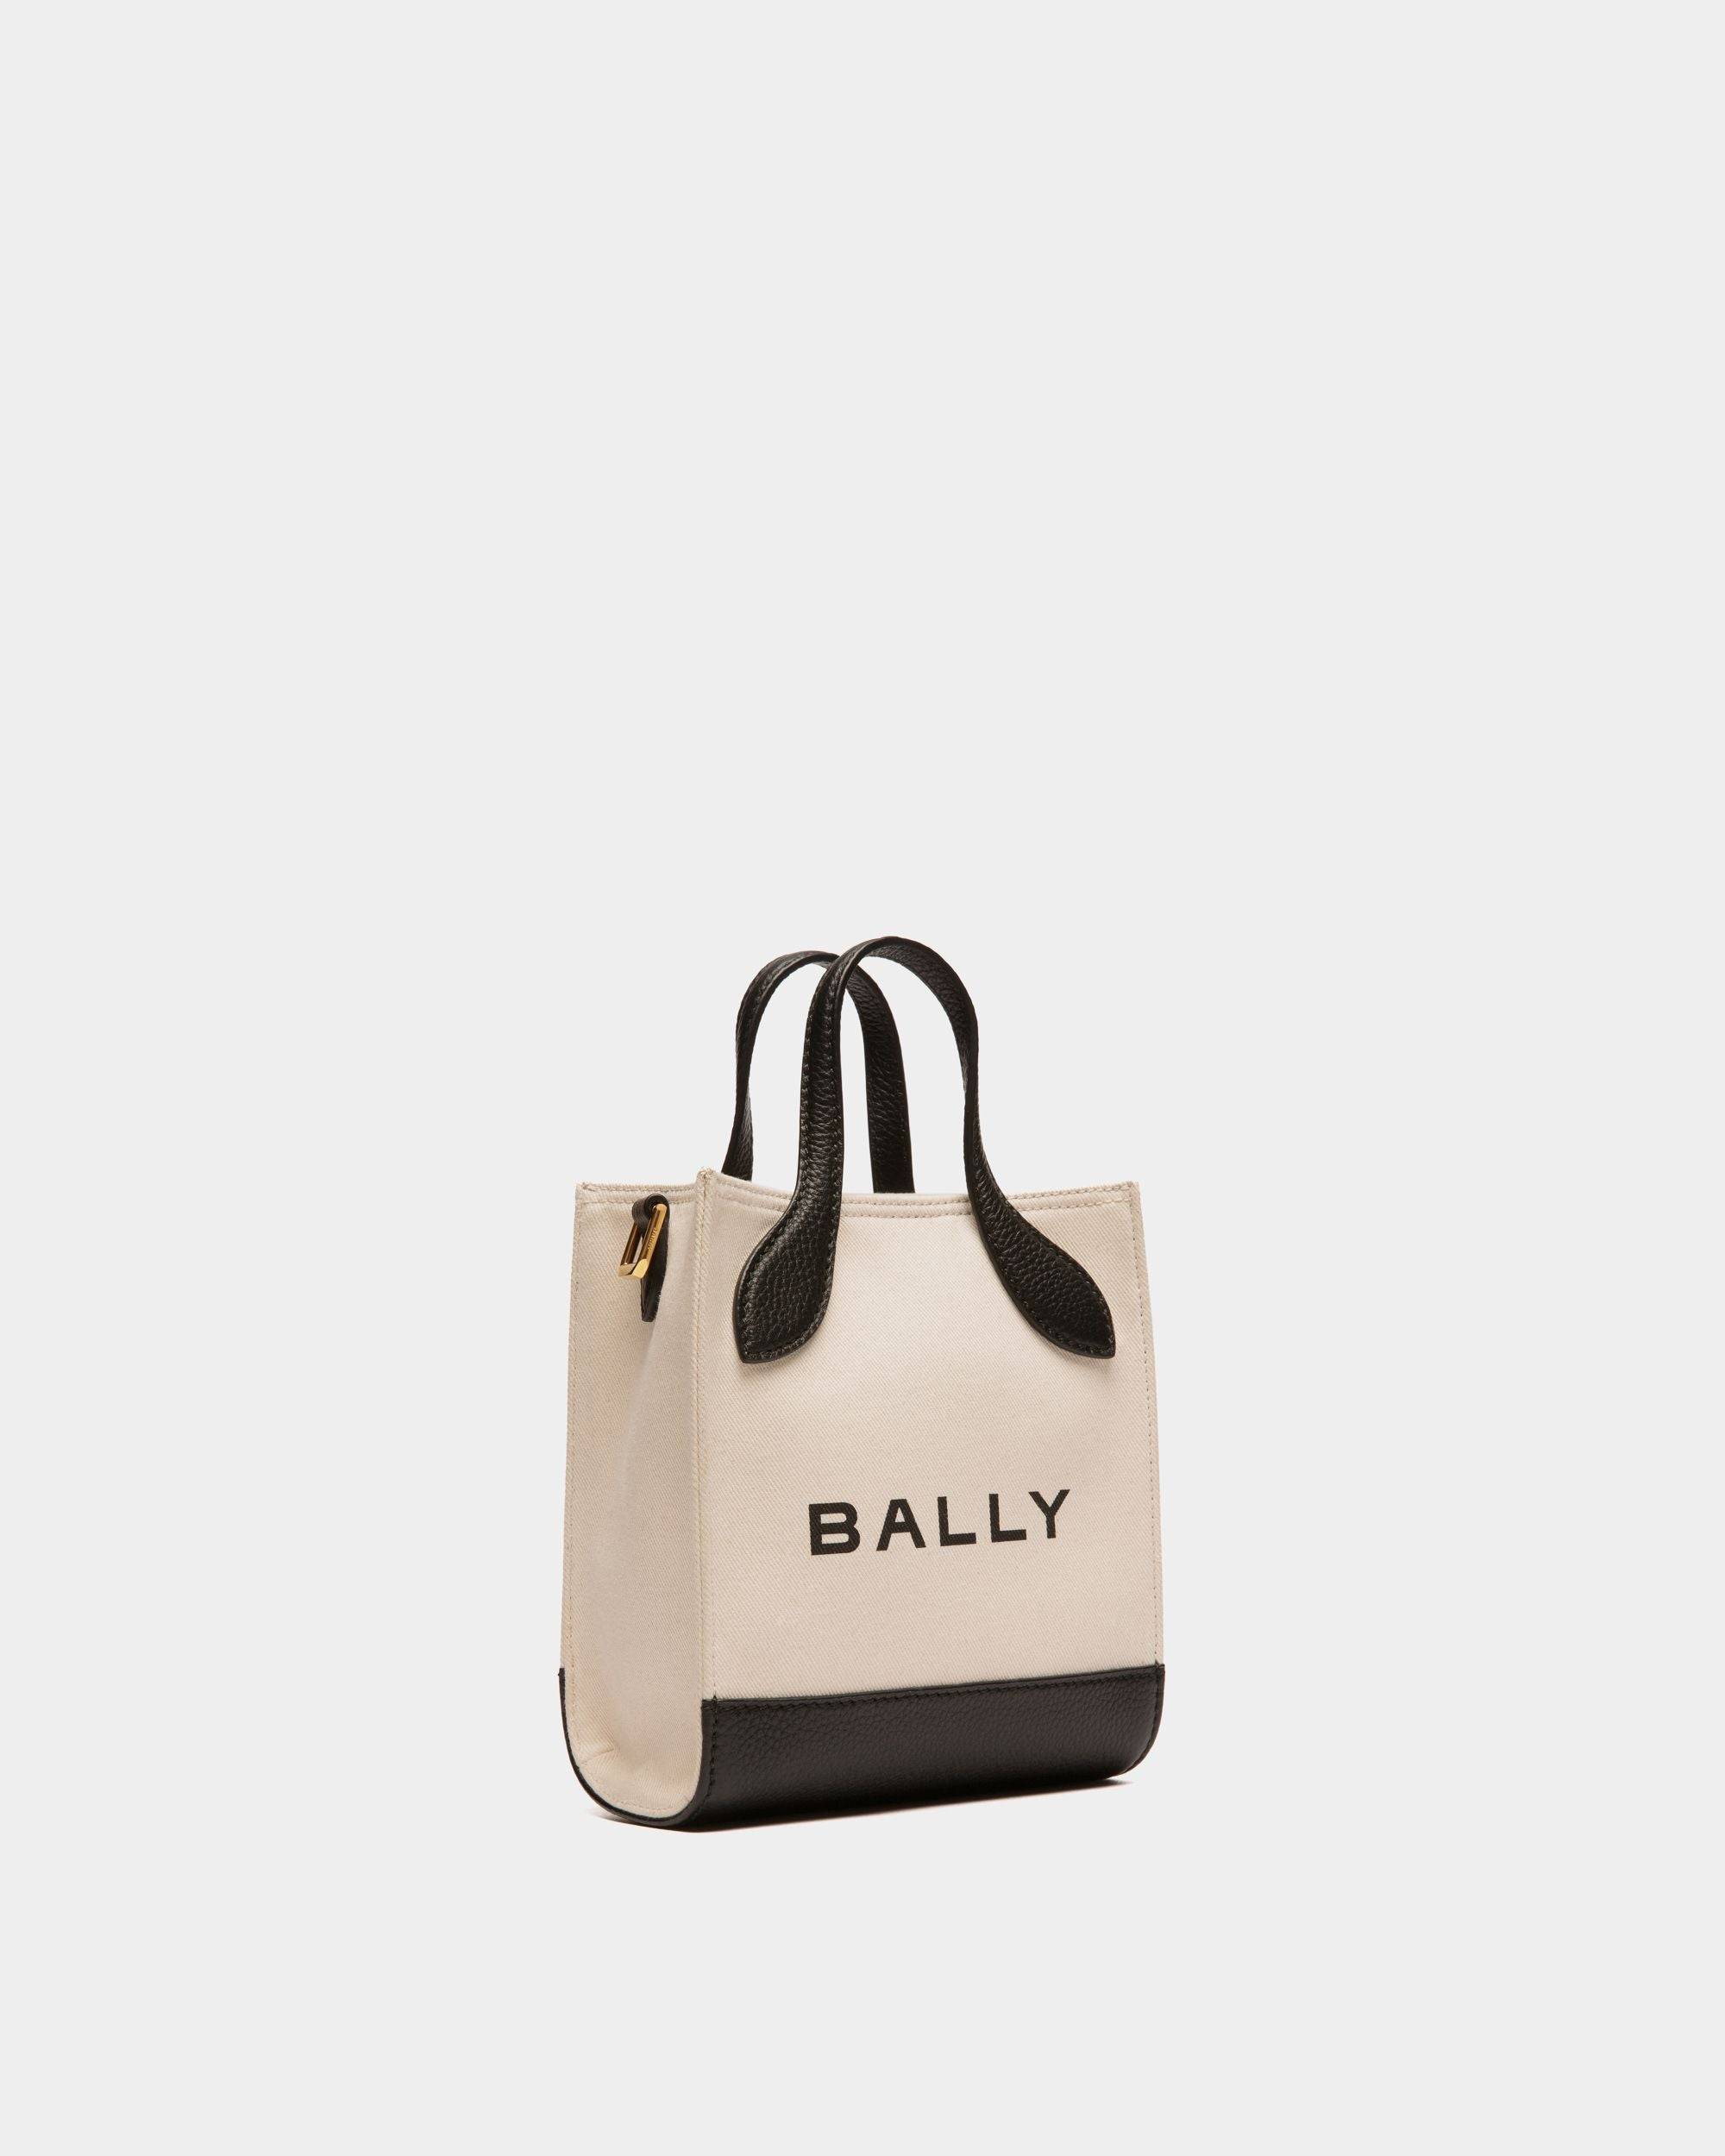 Bar | Women's Mini Tote Bag in Neutral And Black Canvas And Leather | Bally | Still Life 3/4 Front